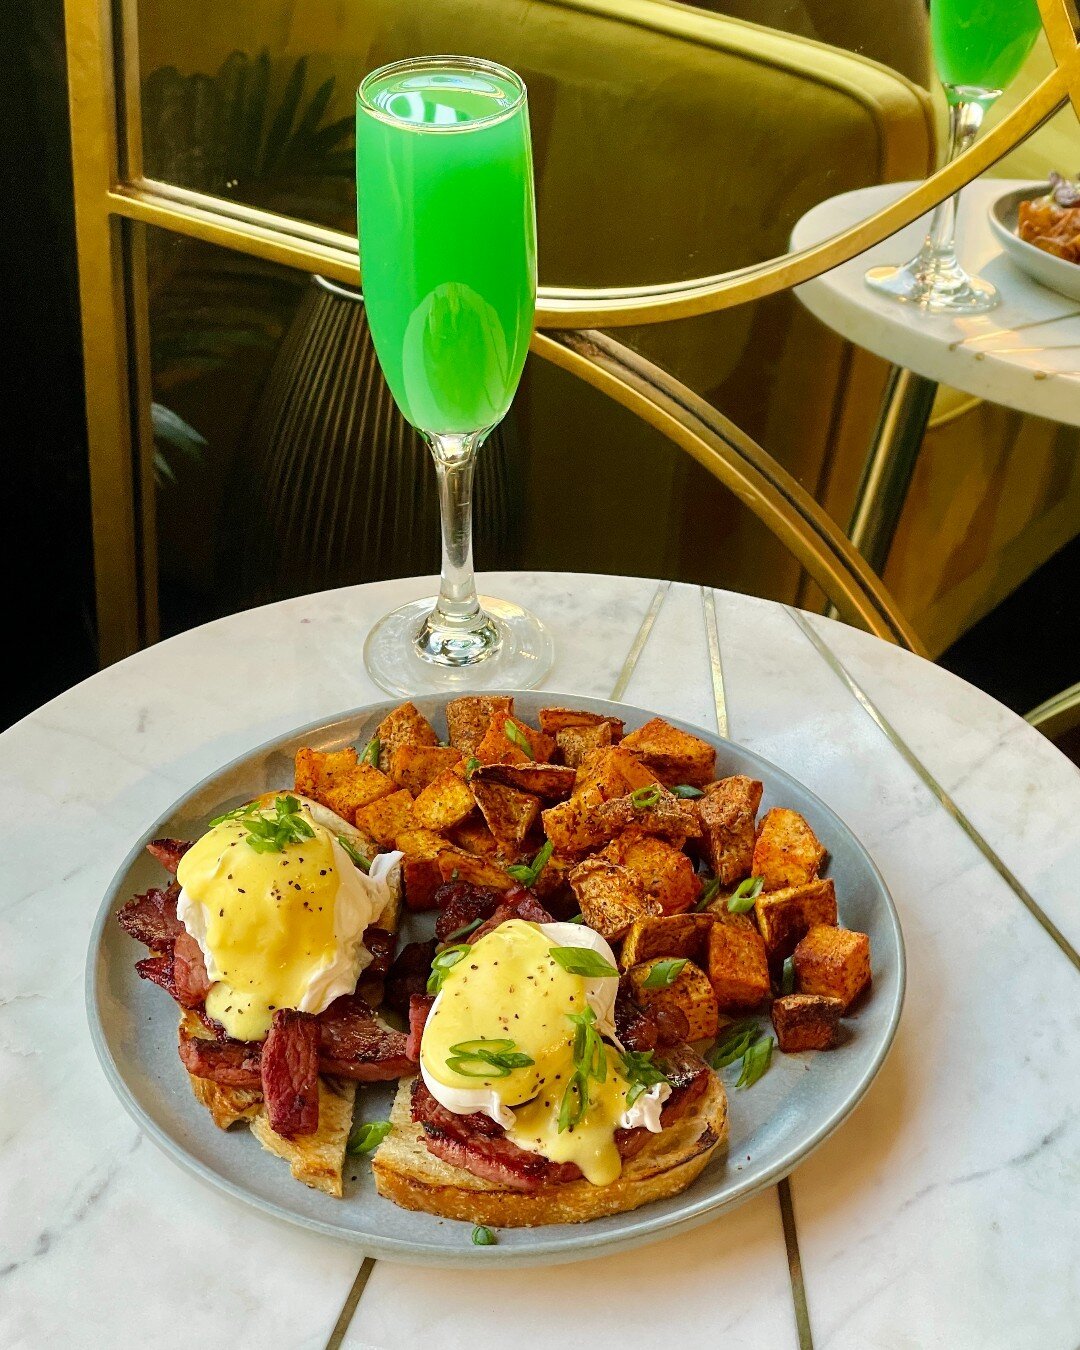 Serving you some liquid luck 🍀 

This Sunday we're hosting a St Patrick's Day brunch party with DJ WhyNot, complete with green mimosas and corned beef hash eggs benedict! 😋 💚 

Until then:
Tonight: Party for a Purpose (5-9pm), DJ AntDowe at 9pm
To